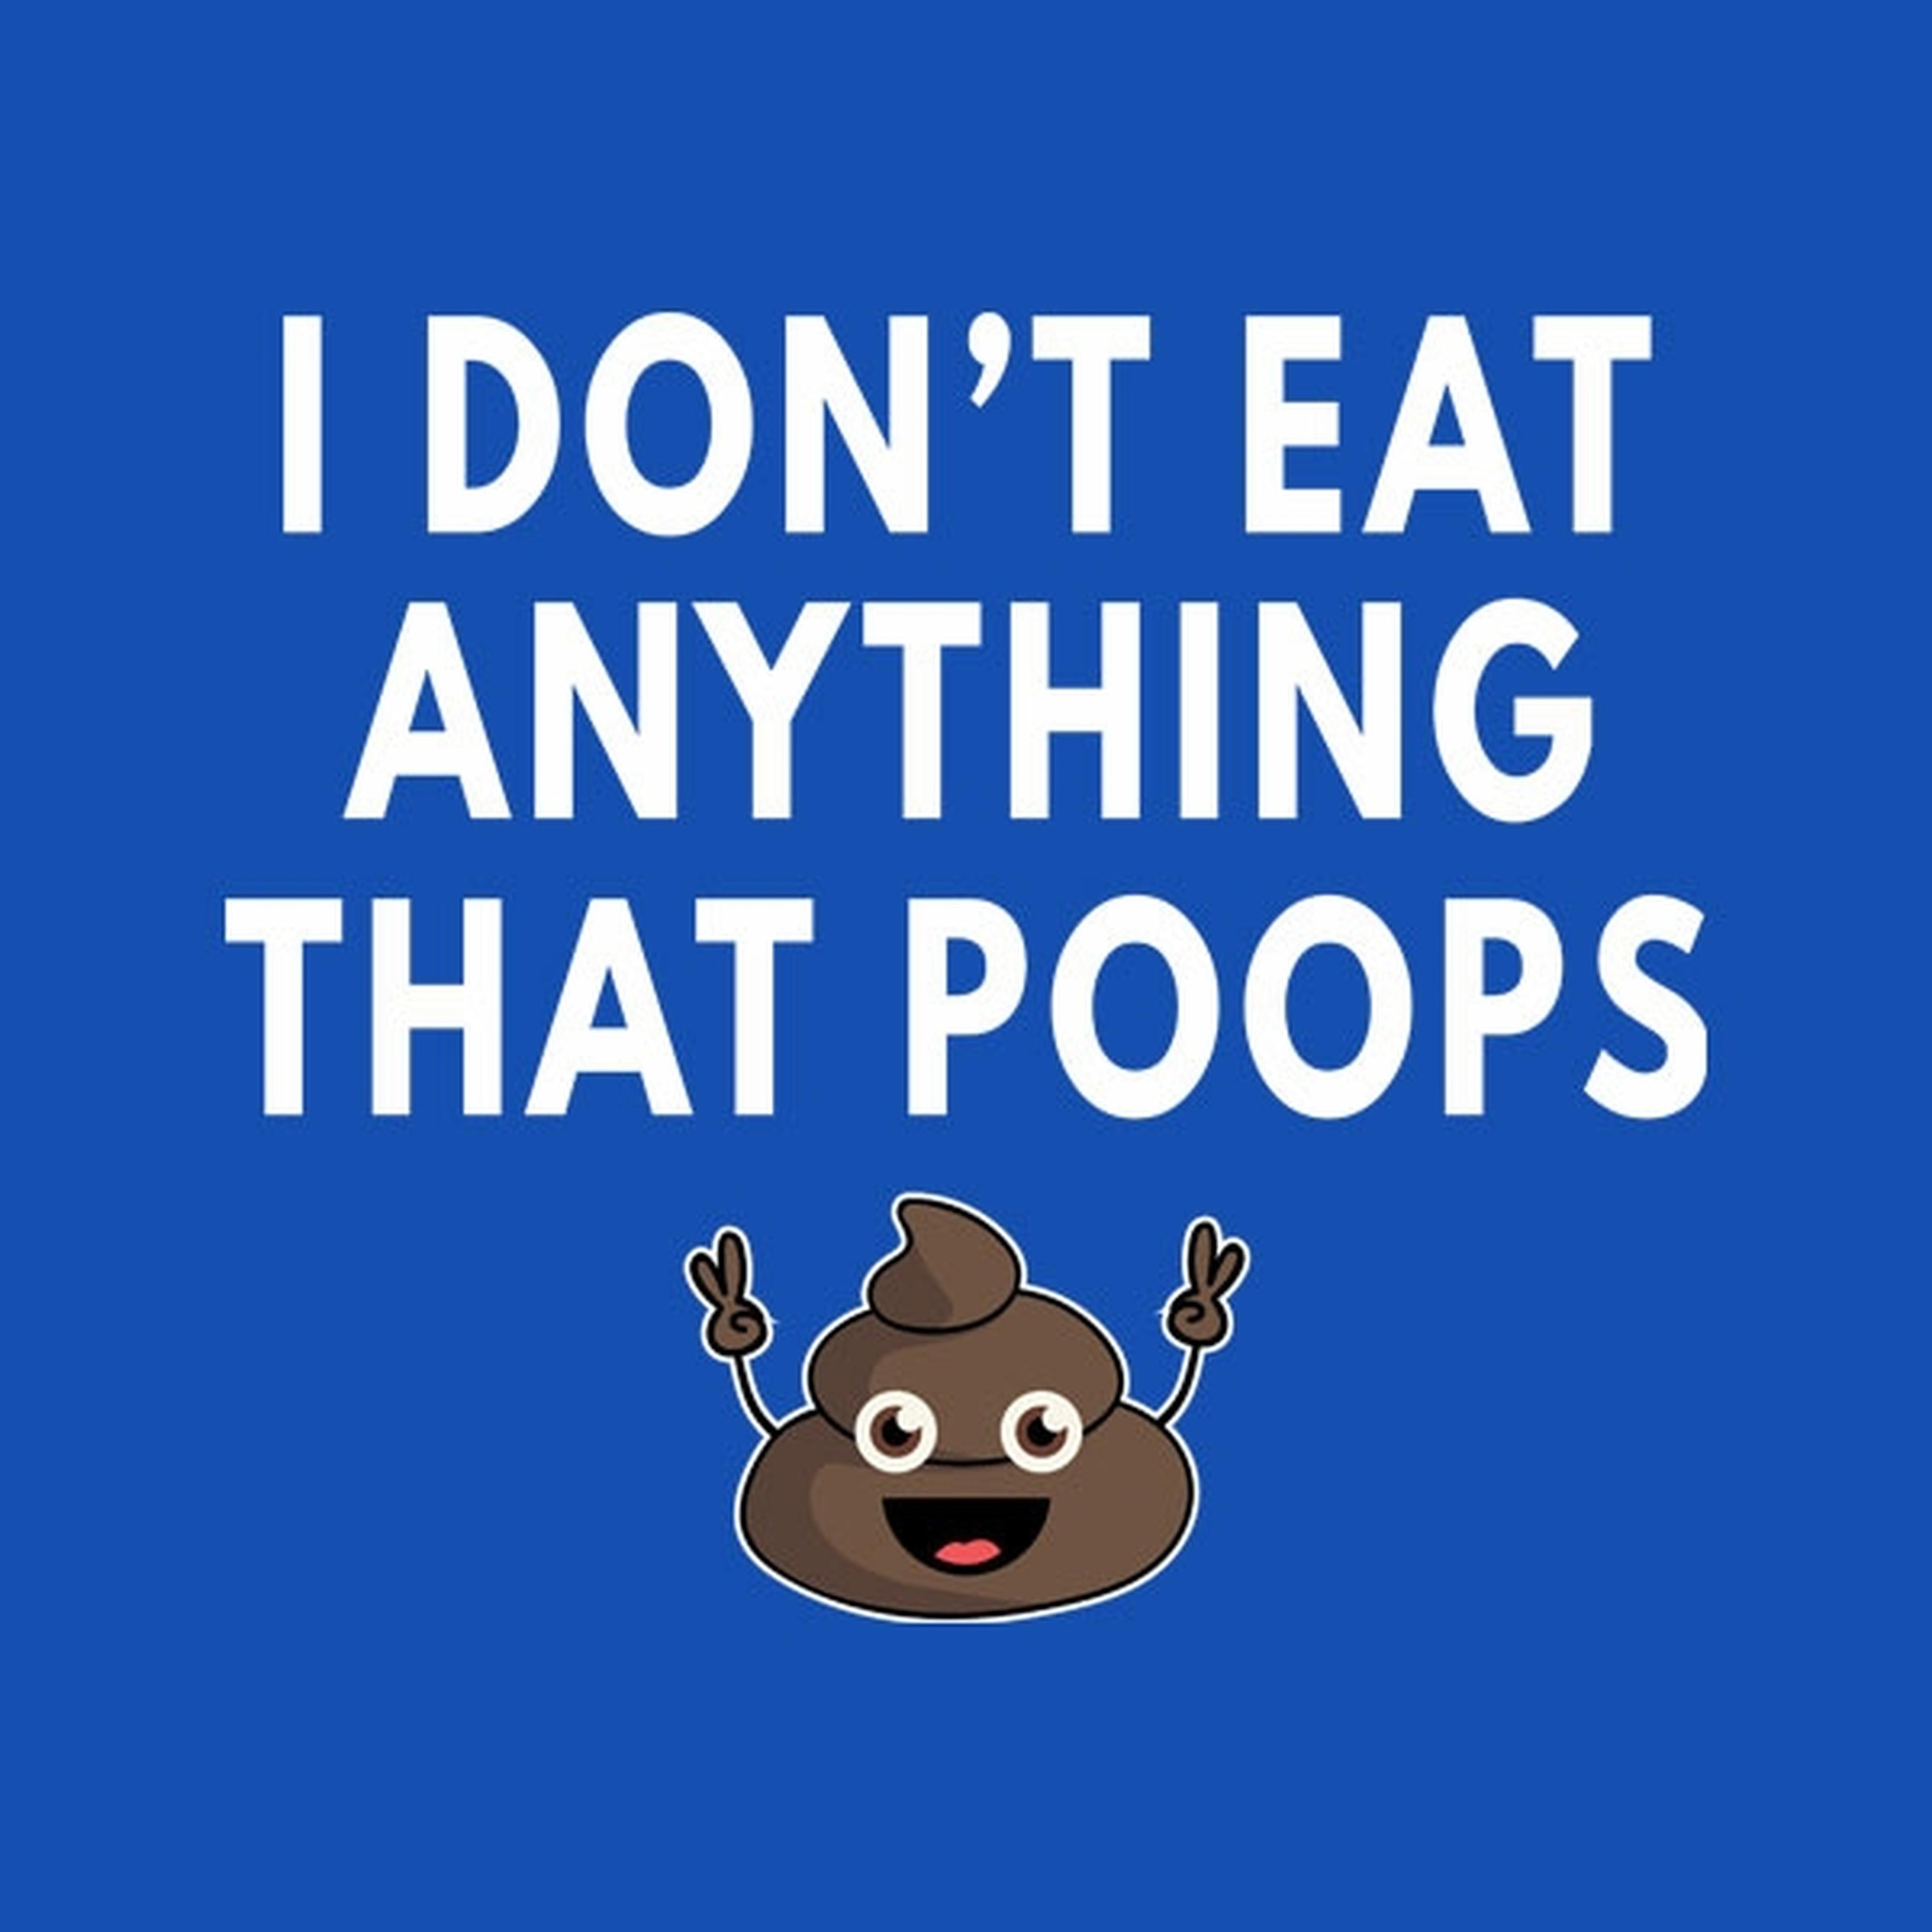 I don't eat anything that poops - T-shirt